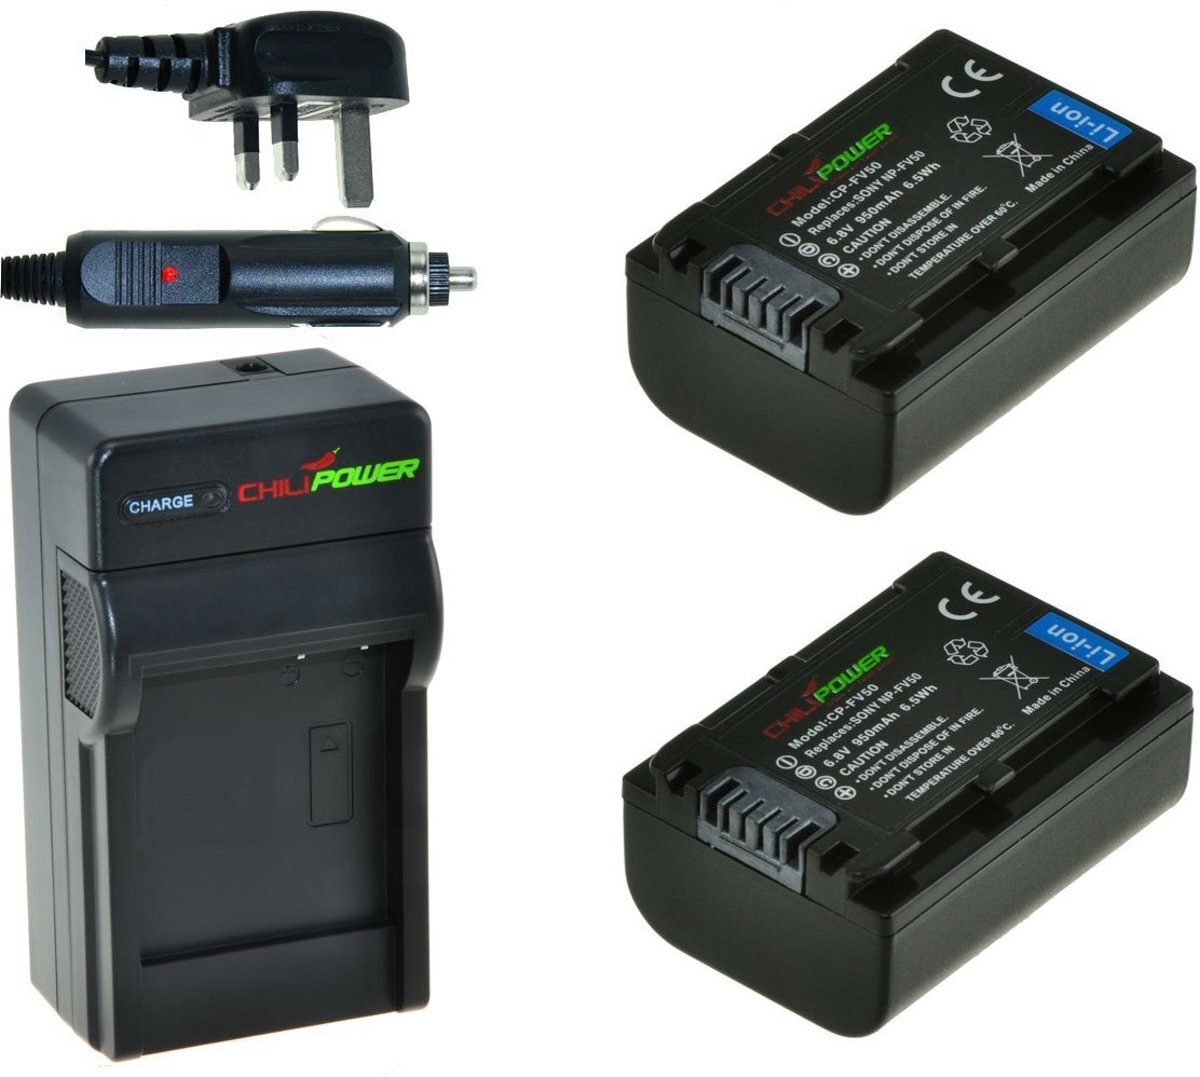 ChiliPower 2 x NP-FV50 accu's voor Sony - Charger Kit + car-charger - UK version 2 x NP-FV50 accu's voor Sony - Charger Kit + car-charger - UK version